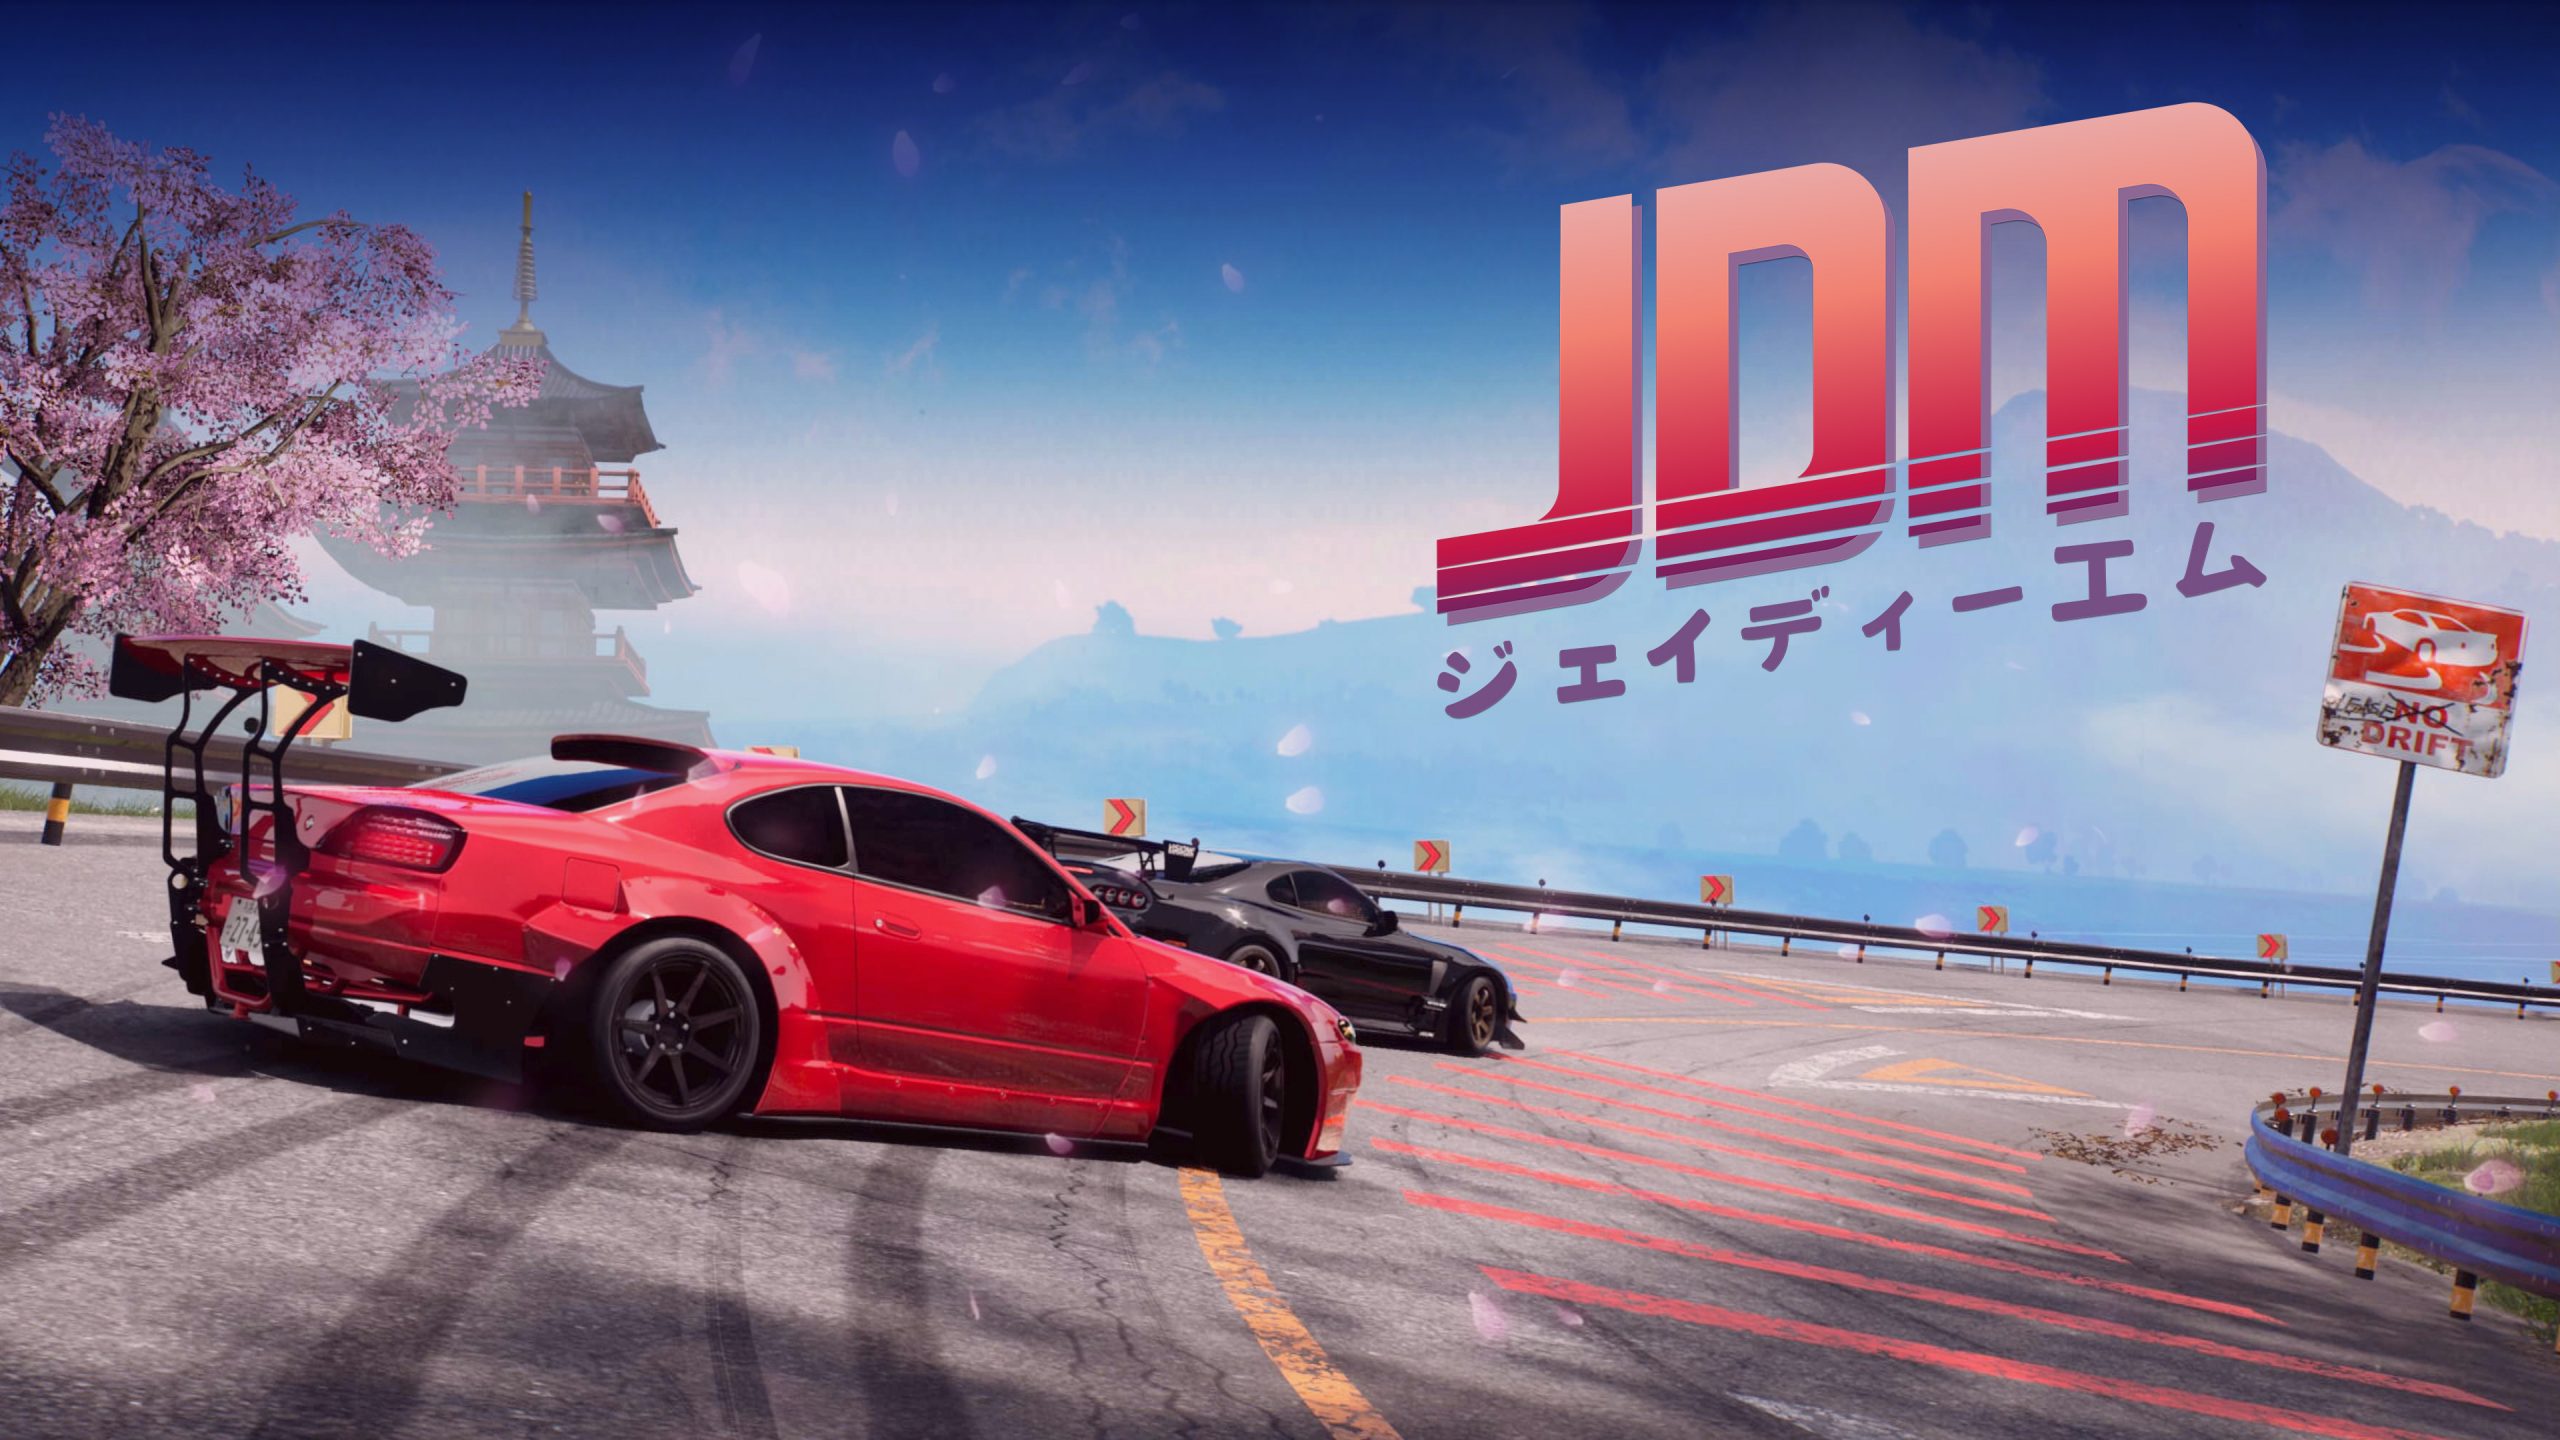 JDM cover